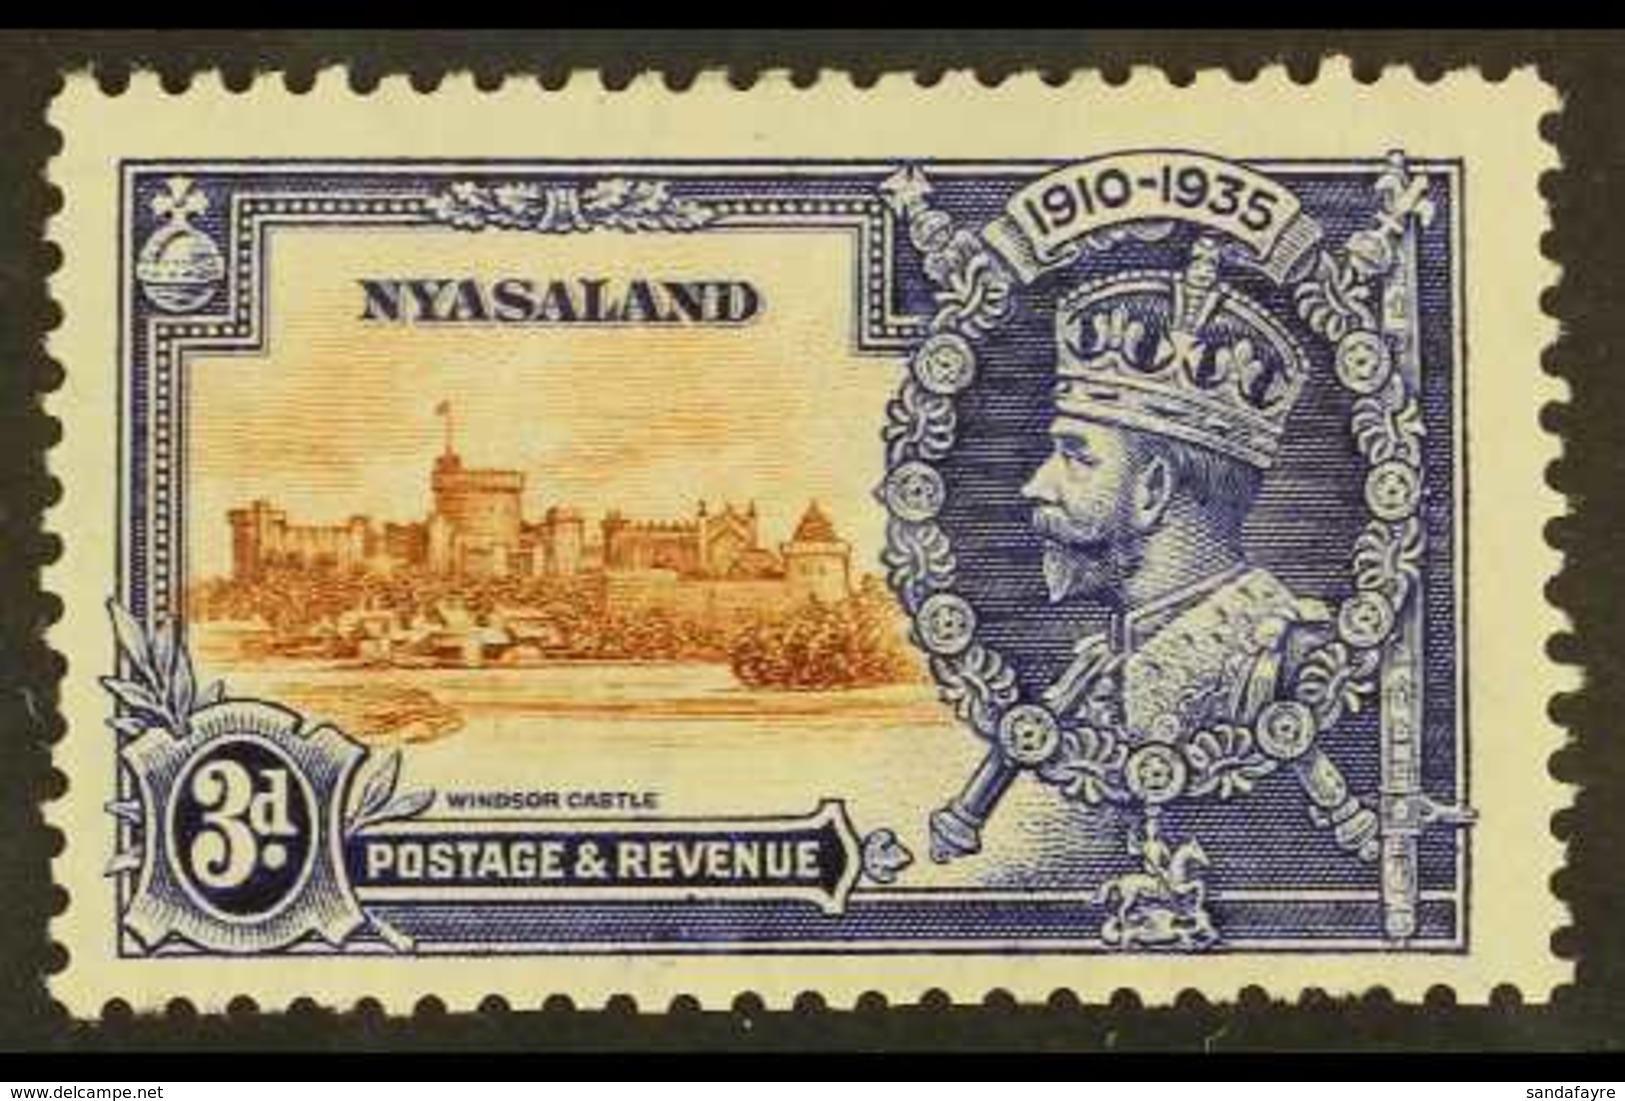 1935 3d Brown And Deep Blue Silver Jubilee With KITE AND VERTICAL LOG Variety, SG 125k, Mint, Shortish Perf At Left. For - Nyassaland (1907-1953)